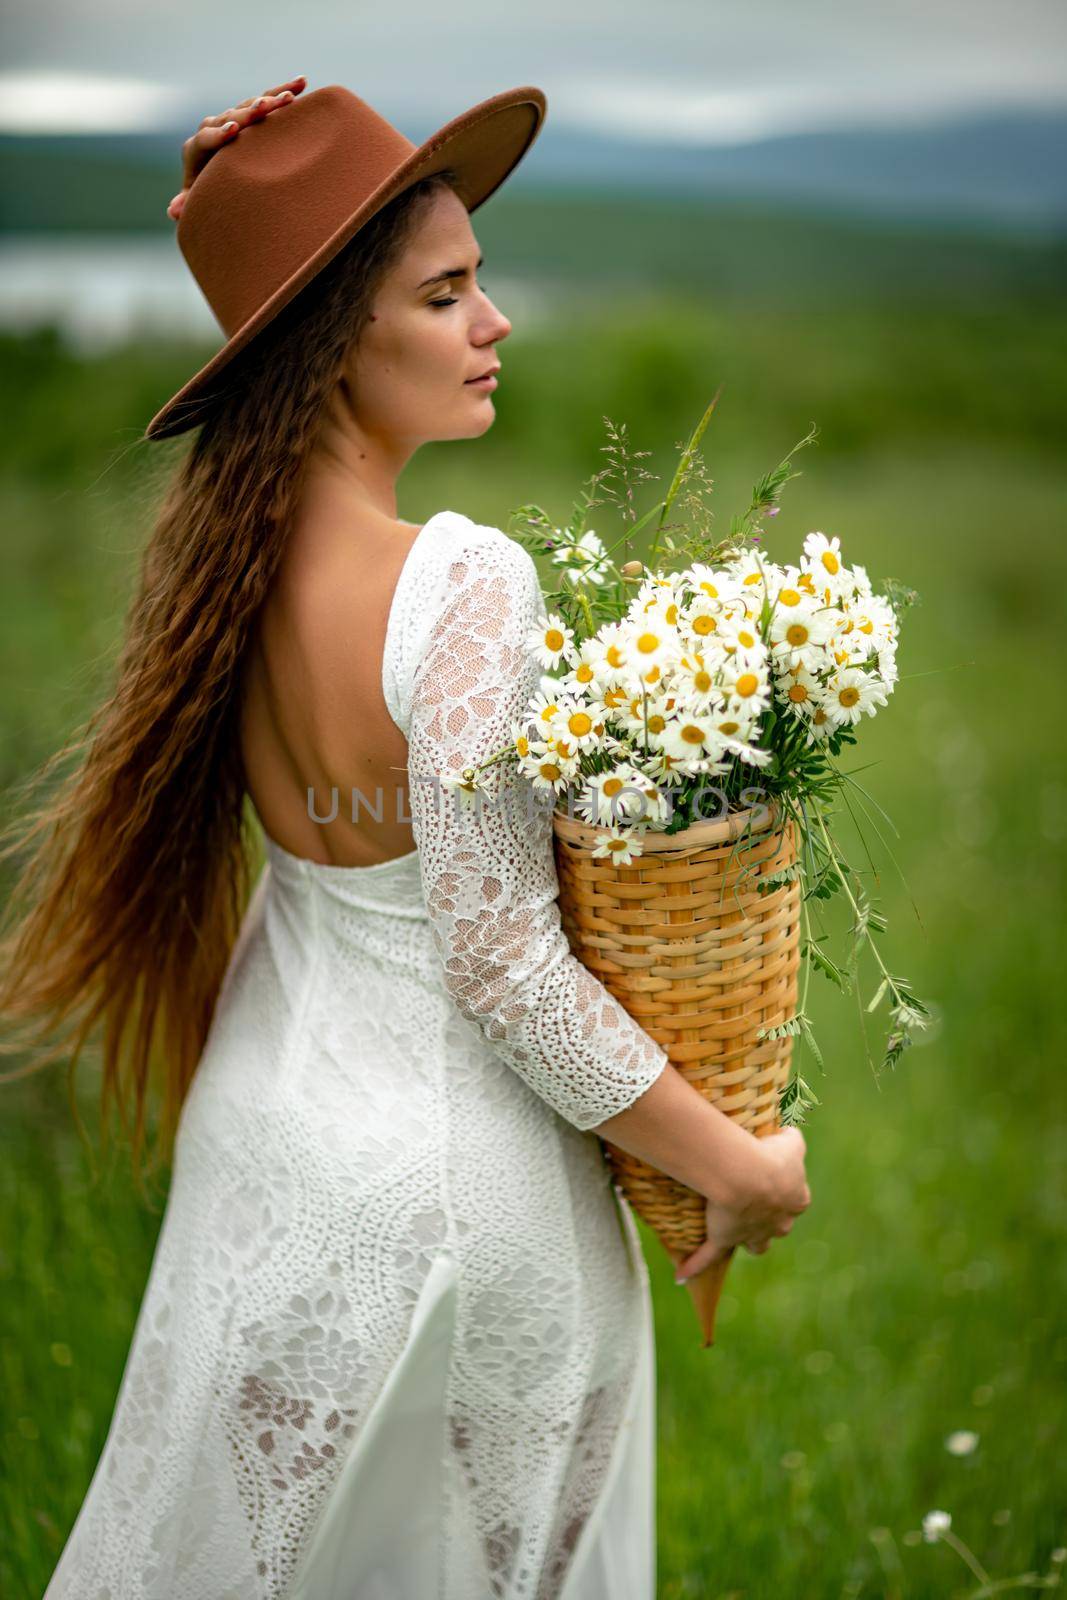 A middle-aged woman in a white dress and brown hat stands on a green field and holds a basket in her hands with a large bouquet of daisies. In the background there are mountains and a lake. by Matiunina